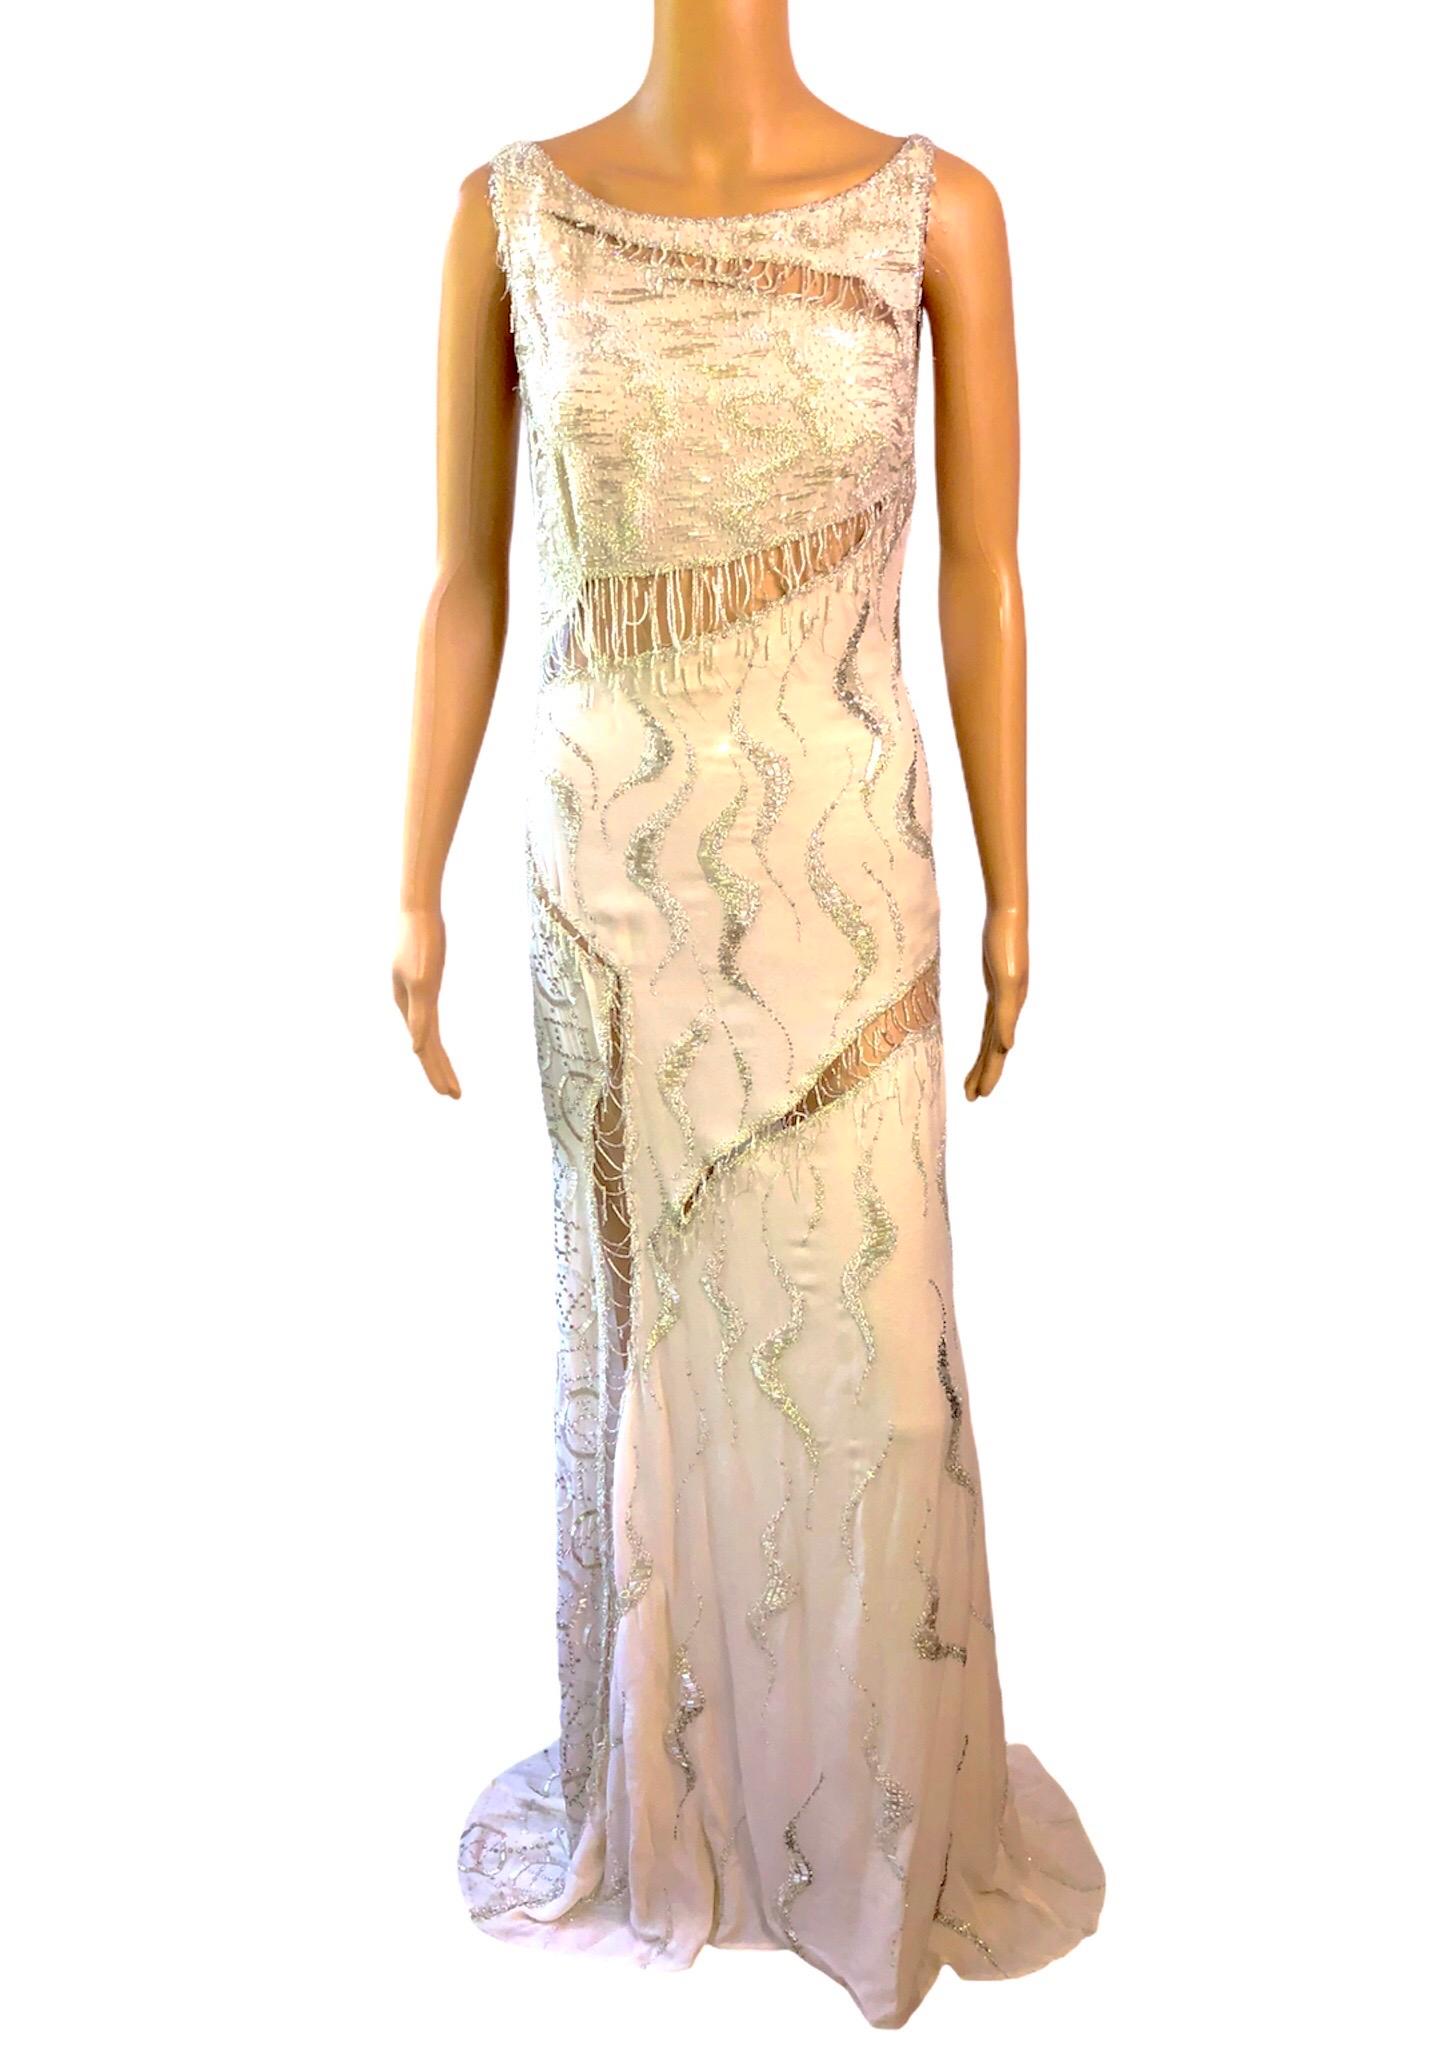 Atelier Versace Couture F/W 1998 Runway Embellished Sheer Cutout Gown Maxi Dress For Sale 3